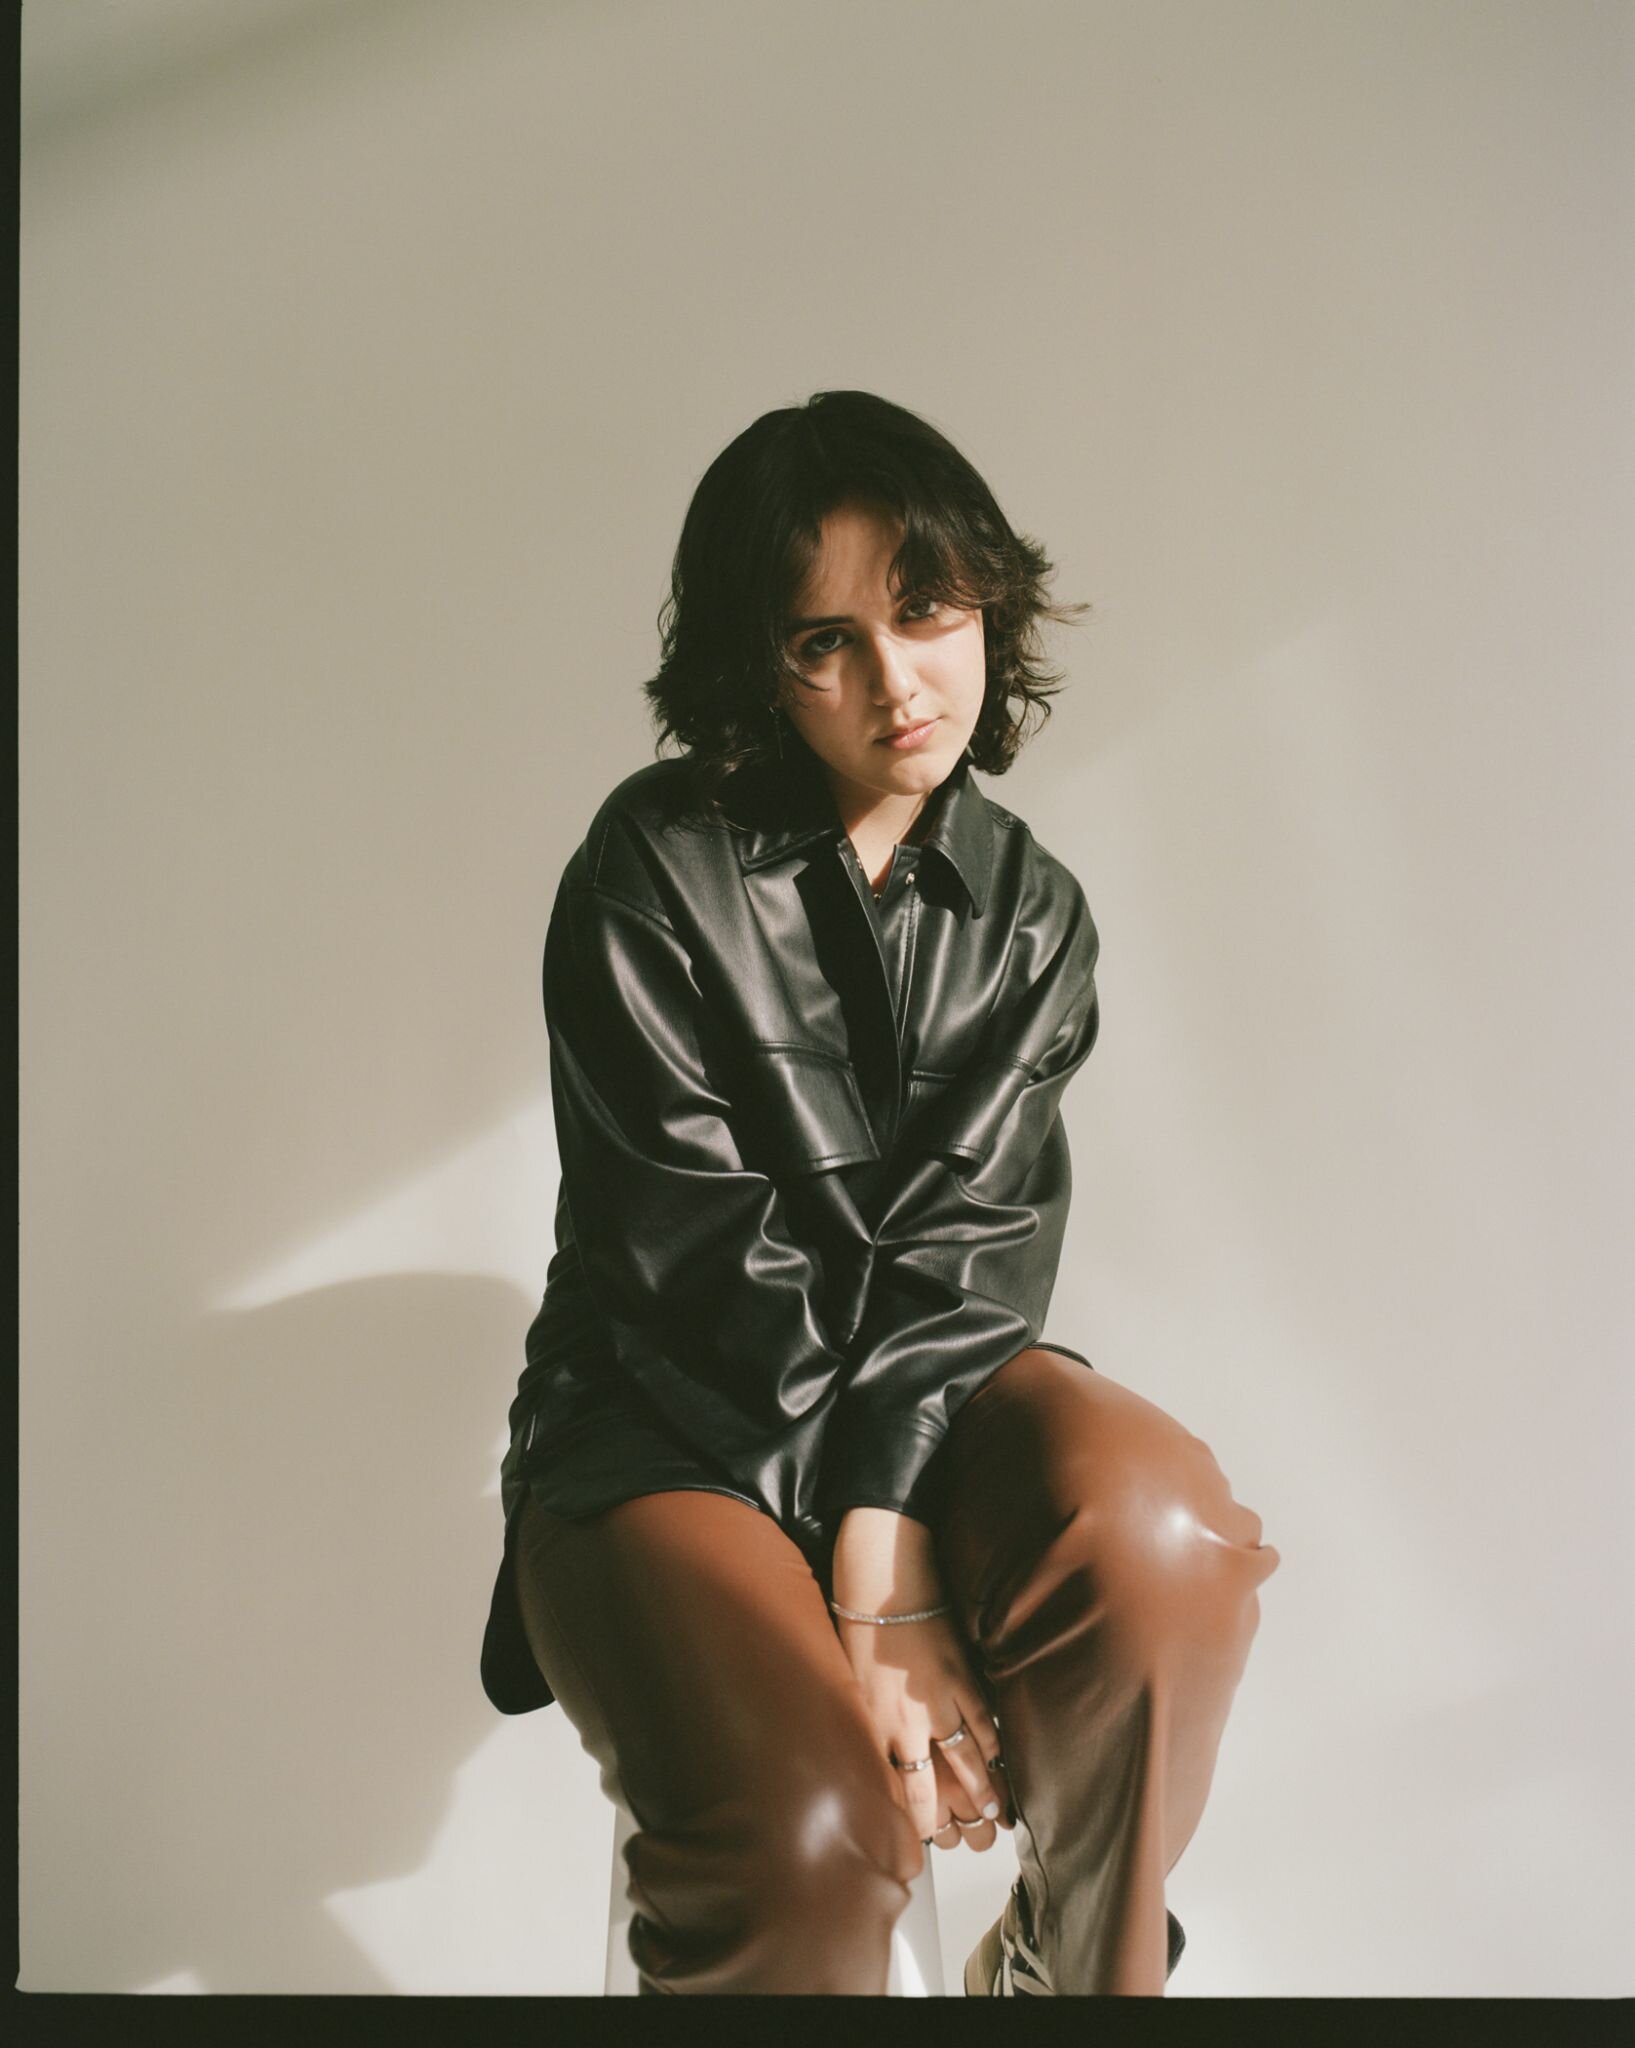 &quot;Born and bred in South Florida, 19-year-old artist and producer Deadbeat Girl has been making waves with their indie-rock sound and honest songwriting. Taking shape as a collection of their innermost thoughts, &lsquo;What Will It Take?&rsquo; i